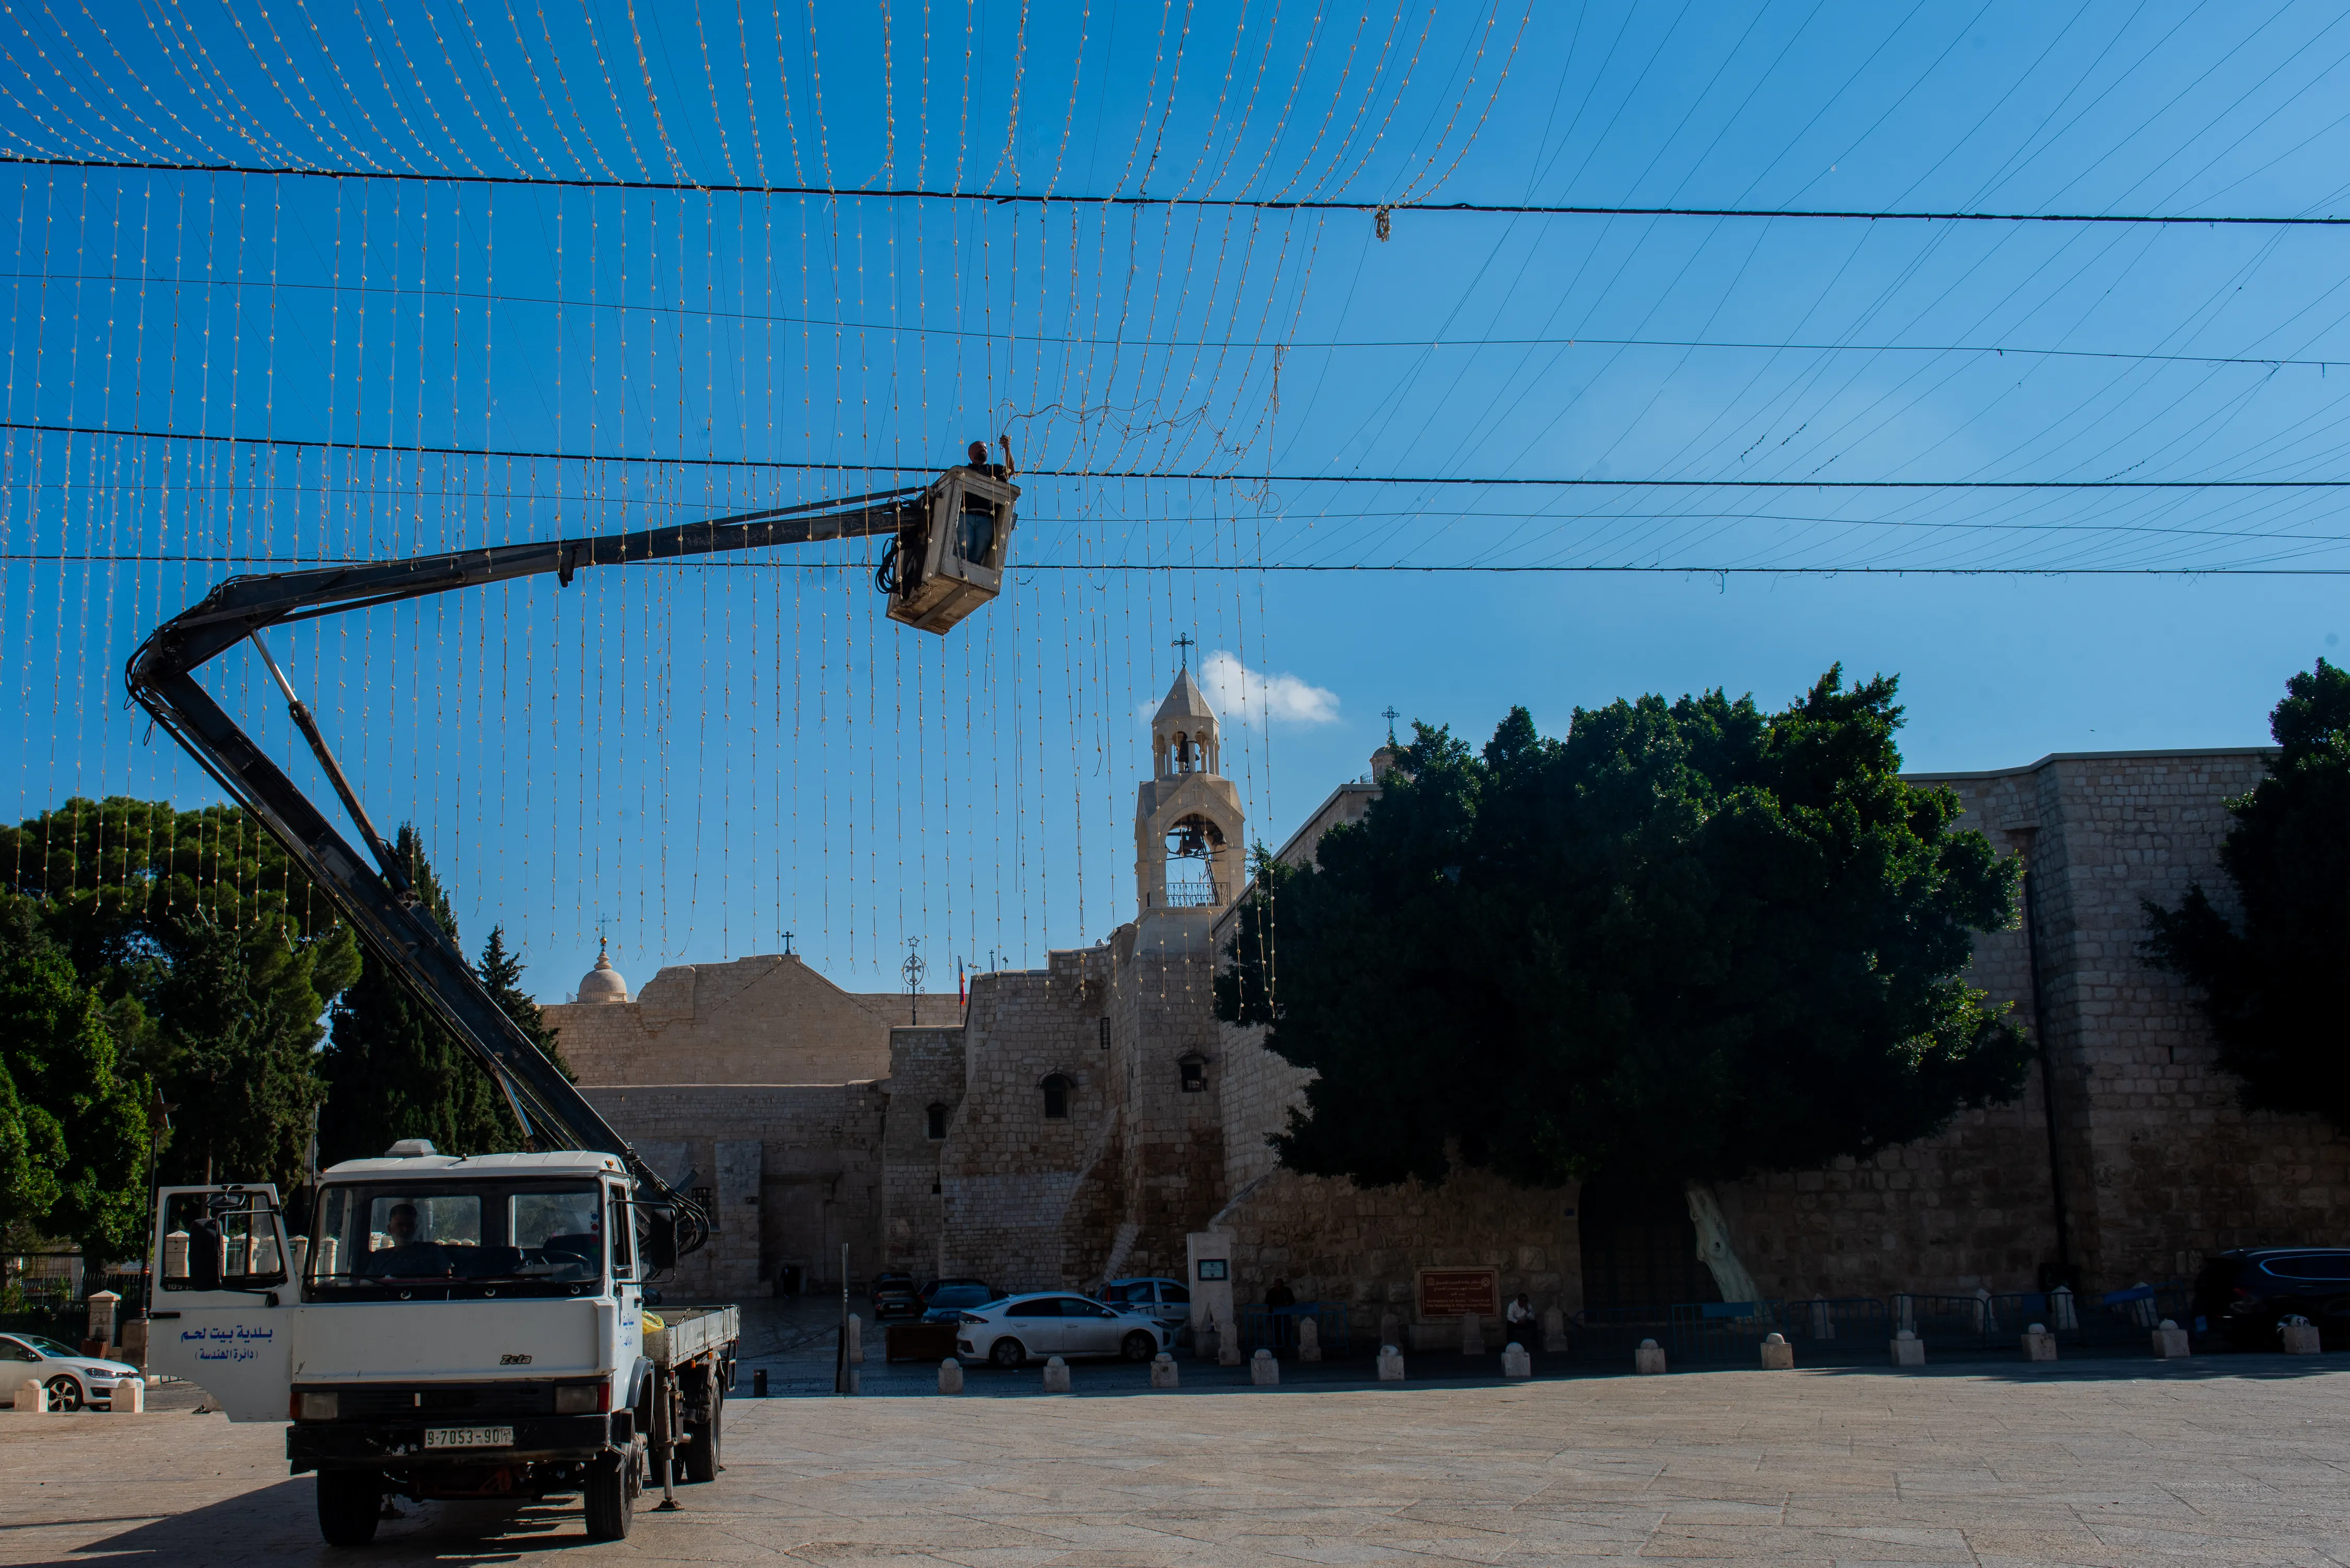 Following the municipality's decision to suspend Christmas events and remove decorations, workers are busy dismantling the light canopy on Manger Square in Bethlehem. Credit: Marinella Bandini